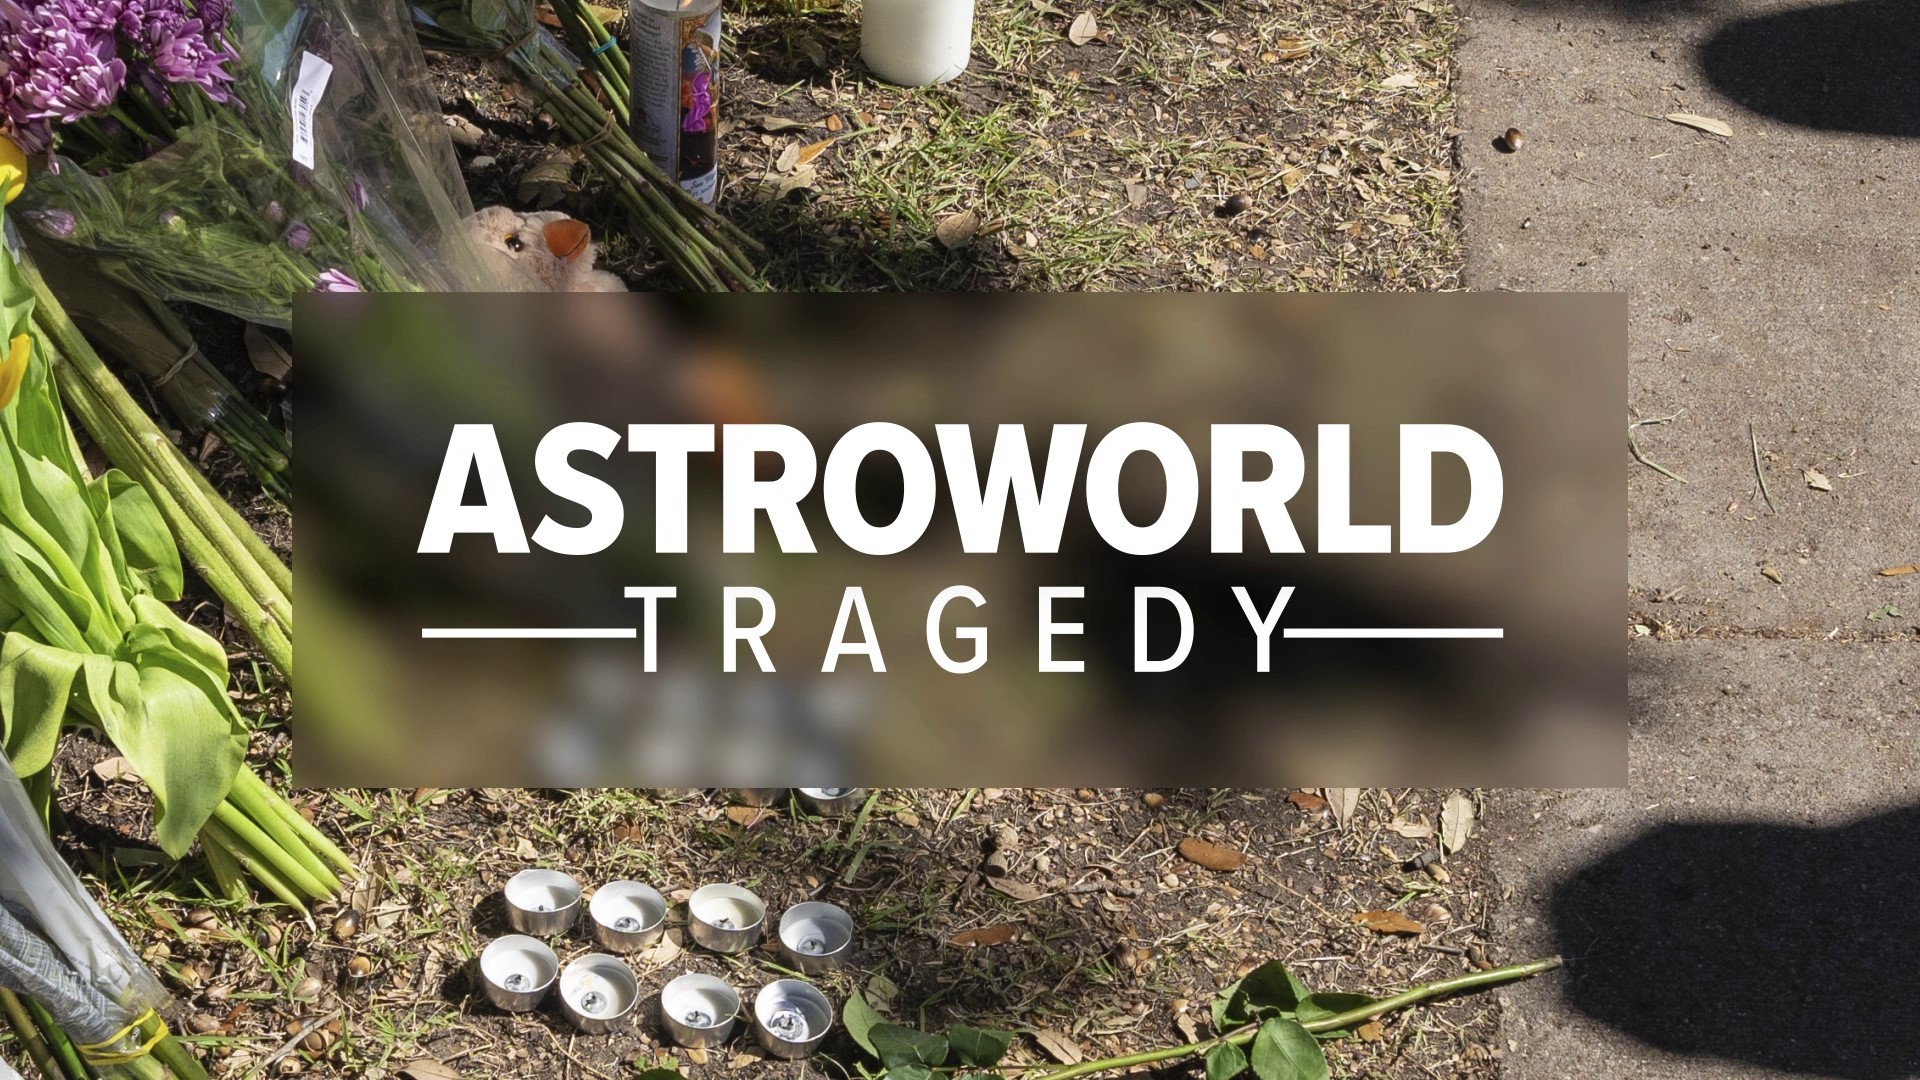 Twelve months after the tragedy at the 2021 Astroworld Music Festival, KHOU's Brandi Smith breaks down what happened, what's changed and other developments.